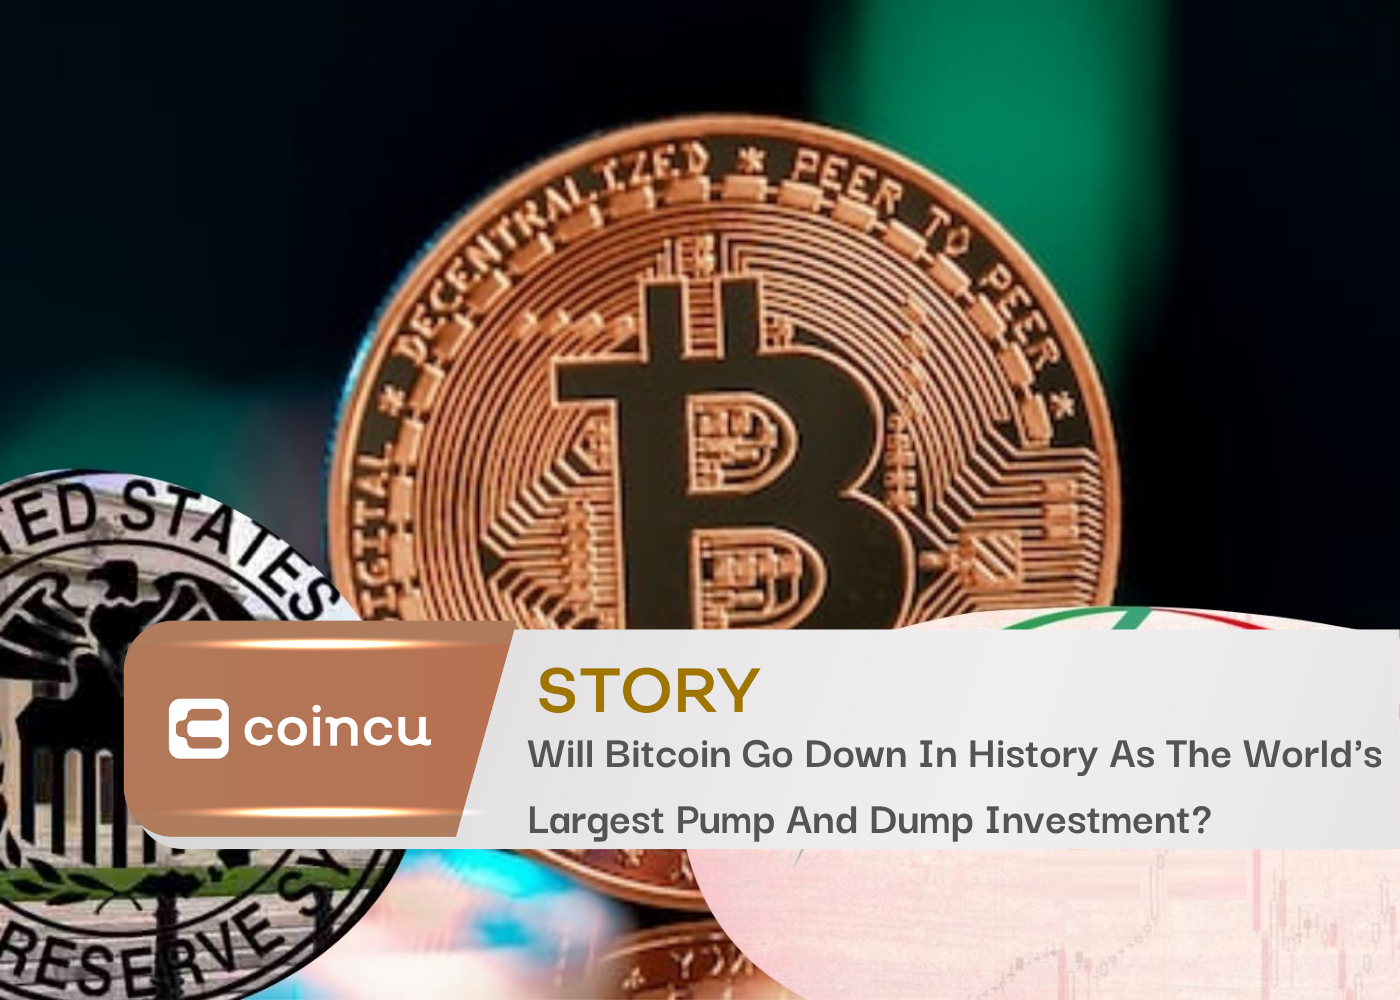 Will Bitcoin Go Down In History As The World's Largest Pump And Dump Investment?